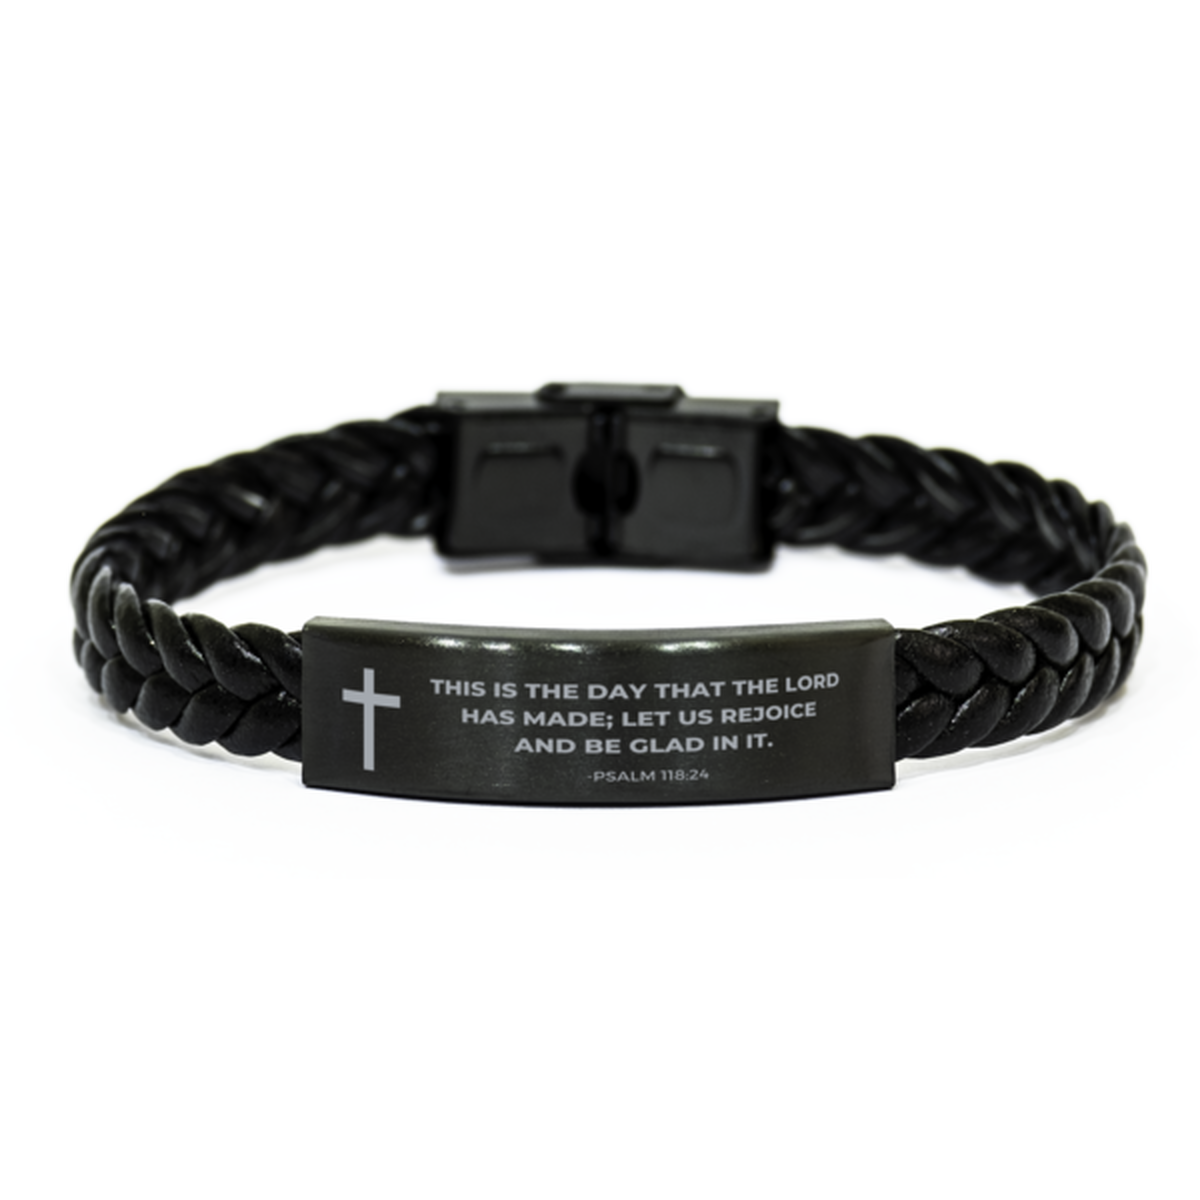 Baptism Gifts For Teenage Boys Girls, Christian Bible Verse Braided Leather Bracelet, This is the day that the lord has made, Catholic Confirmation Gifts for Son, Godson, Grandson, Nephew